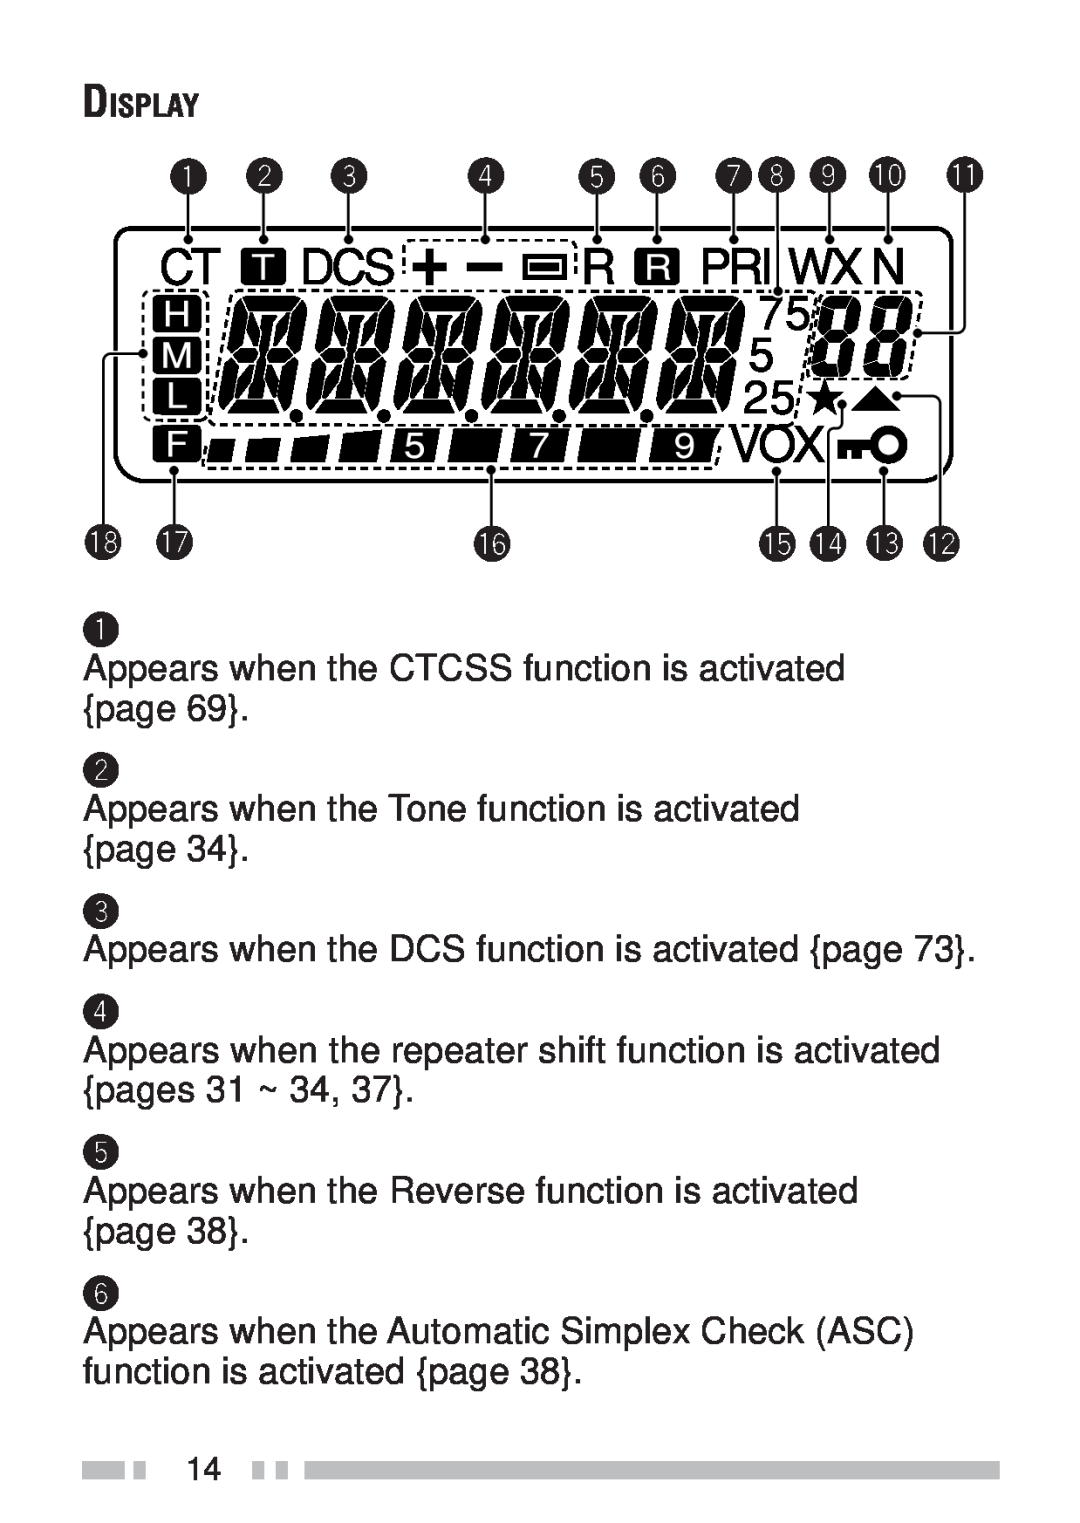 Kenwood TH-K2AT, TH-KAE, TH-K4AT, TH-K2ET q w e r t y ui o !0 !1, 5!4!3!2, Appears when the CTCSS function is activated page 